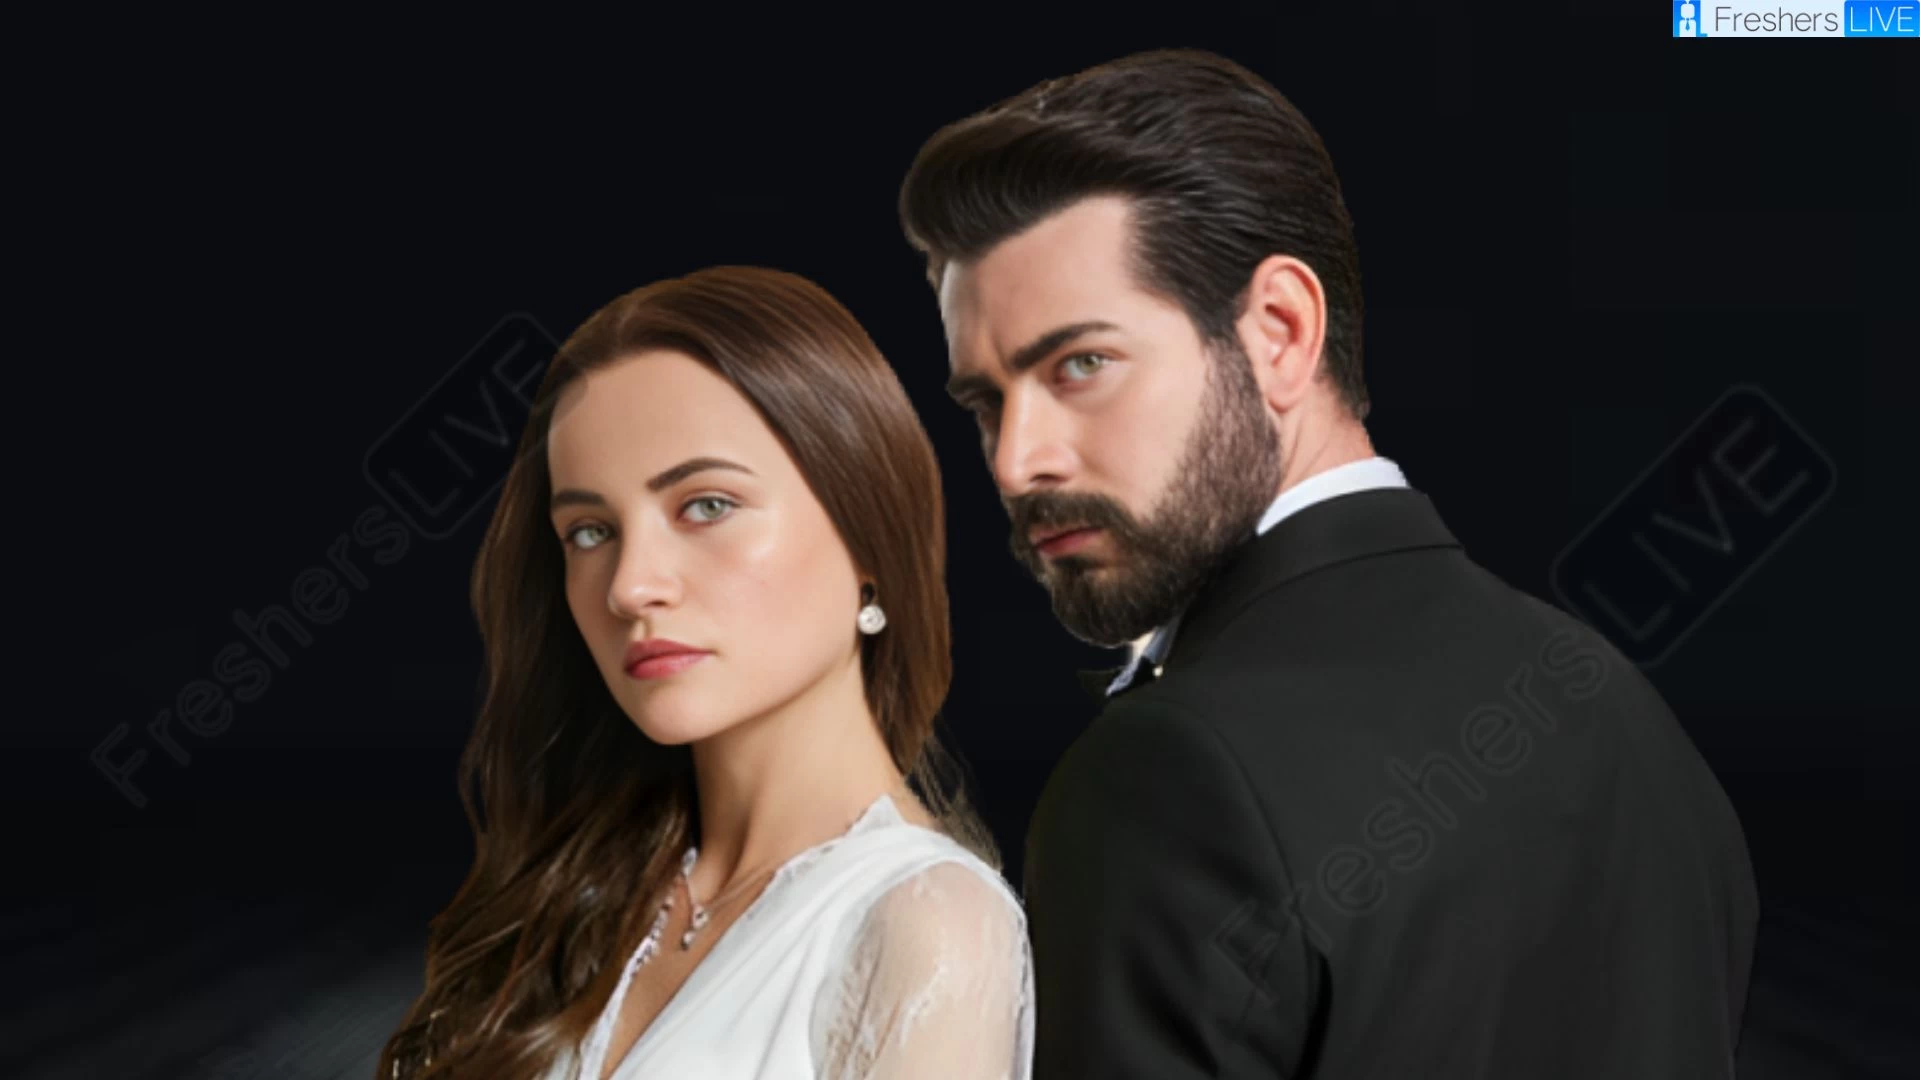 Kan Cicekleri Season 2 Episode 8 Release Date and Time, Countdown, When is it Coming Out?